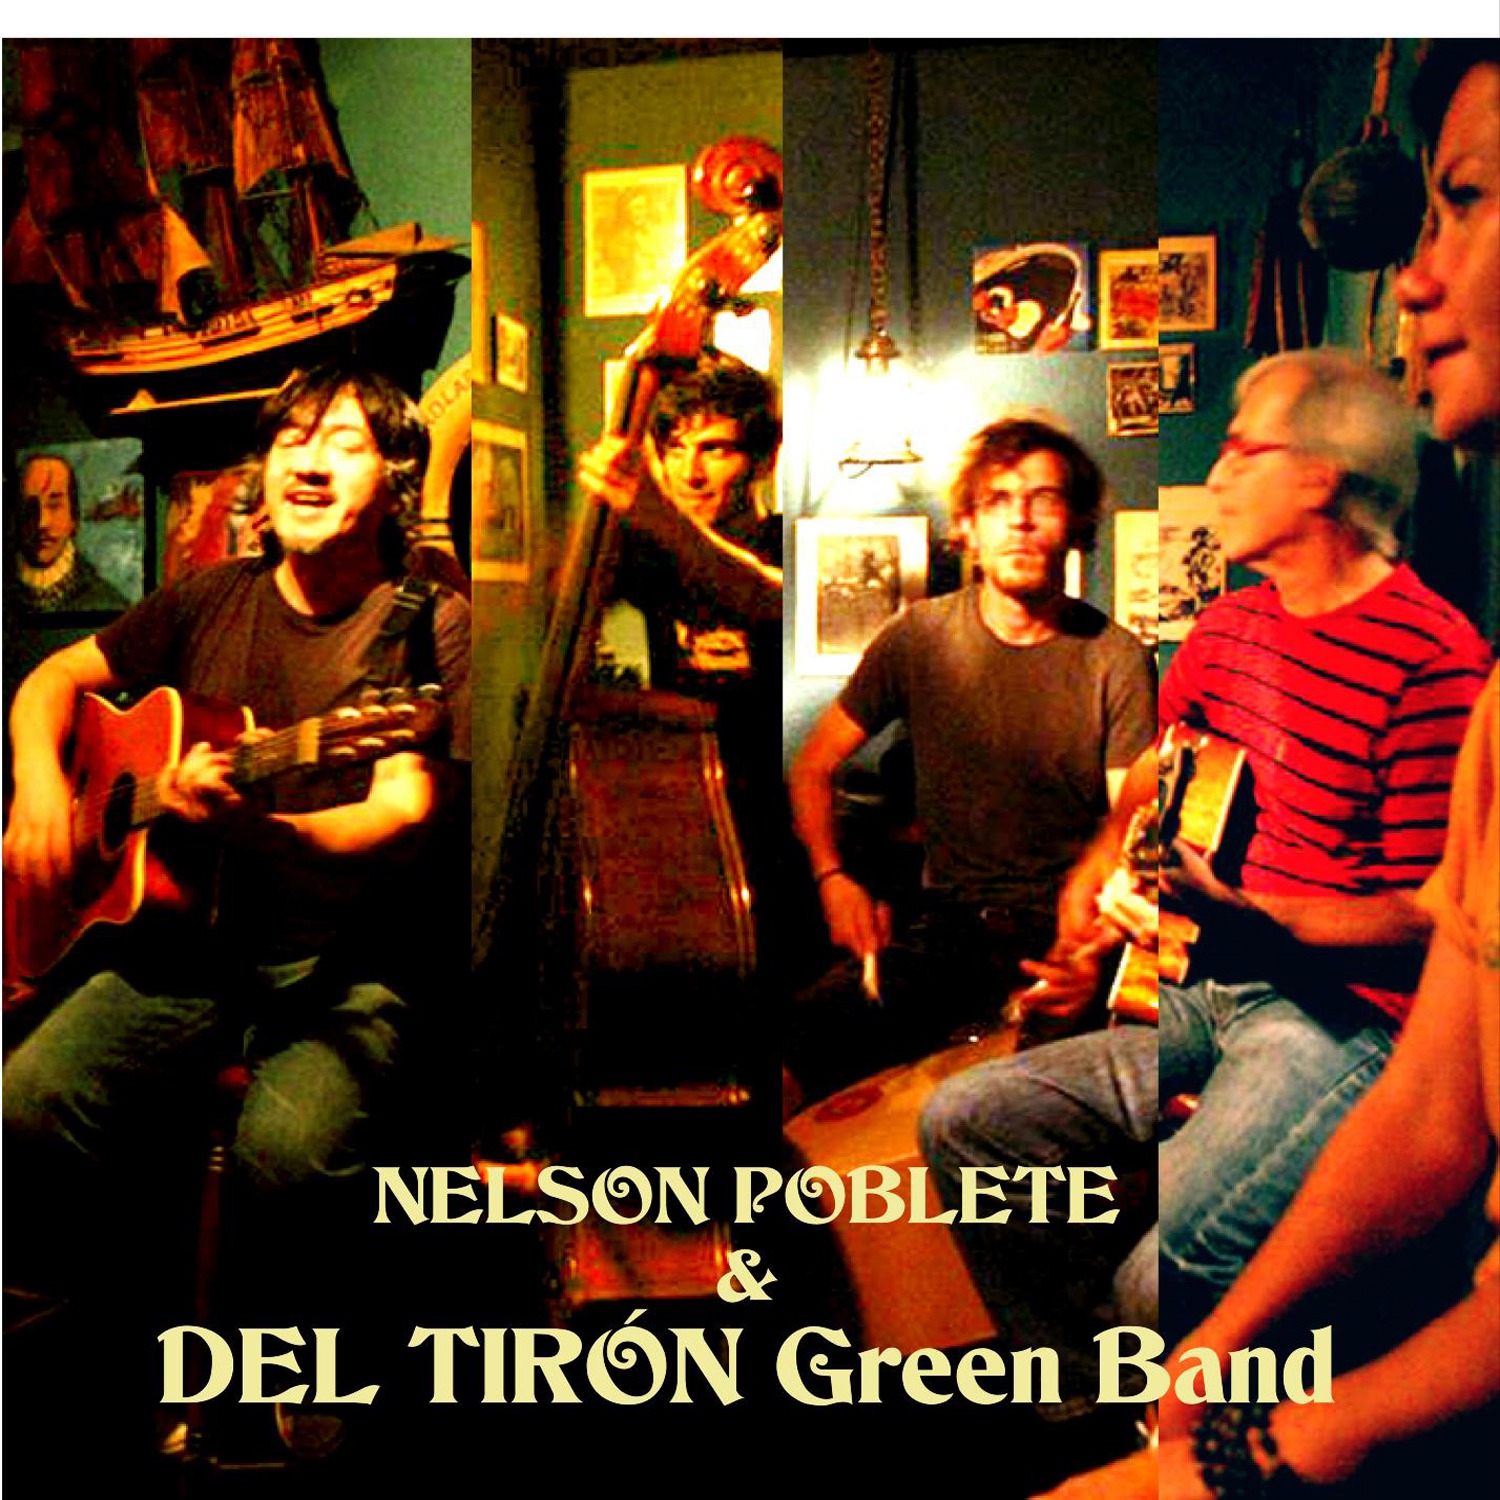 Nelson Poblete  DEL TIRÓ N Green Band